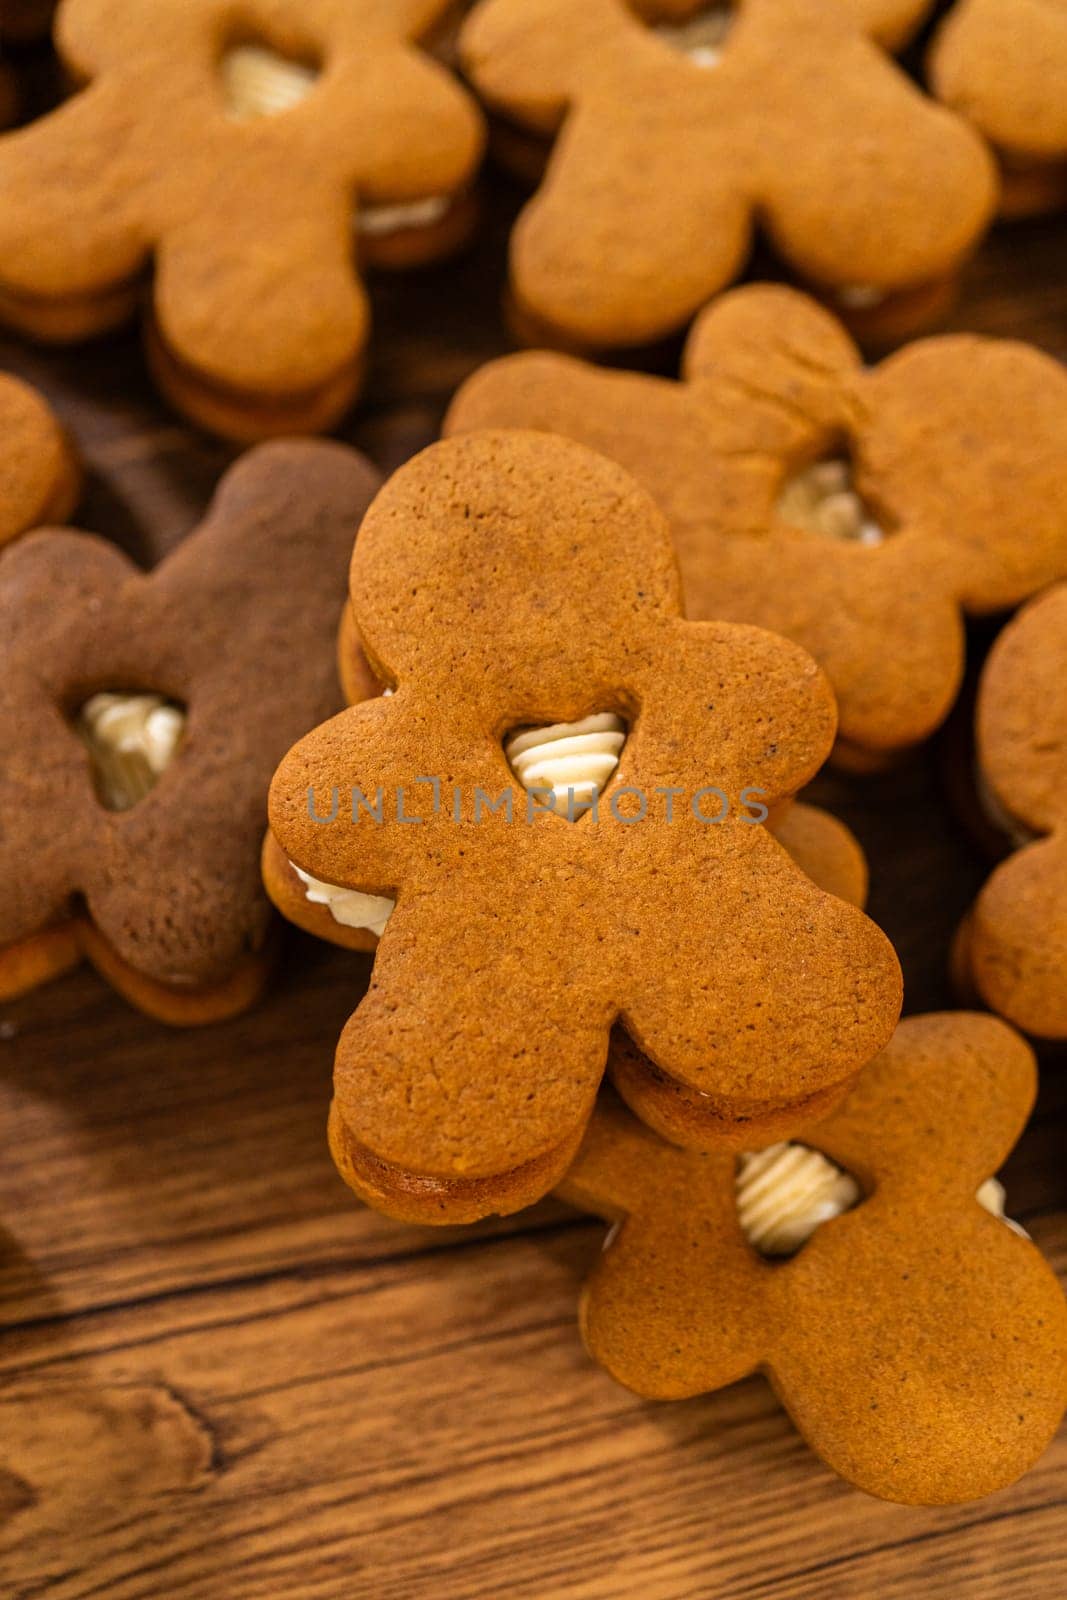 Making gingerbread man cookie sandwiches filled with eggnog buttercream, arrayed on a rustic wooden table, ideal for heartfelt Christmas gifting.